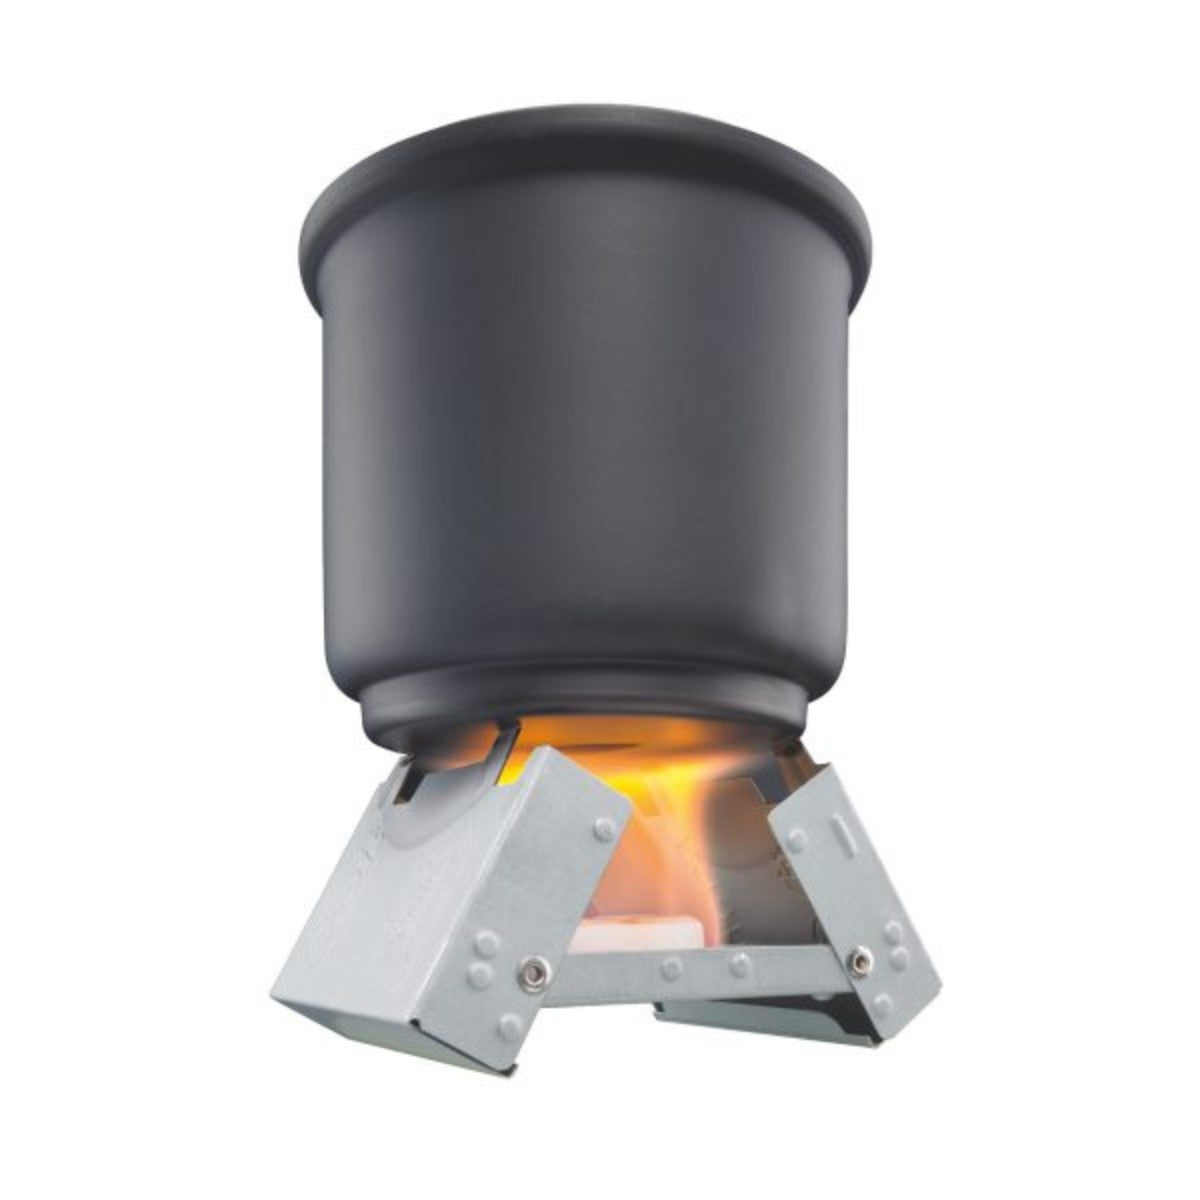 Small Pocket Stove with Fuel 6 pc X 14g